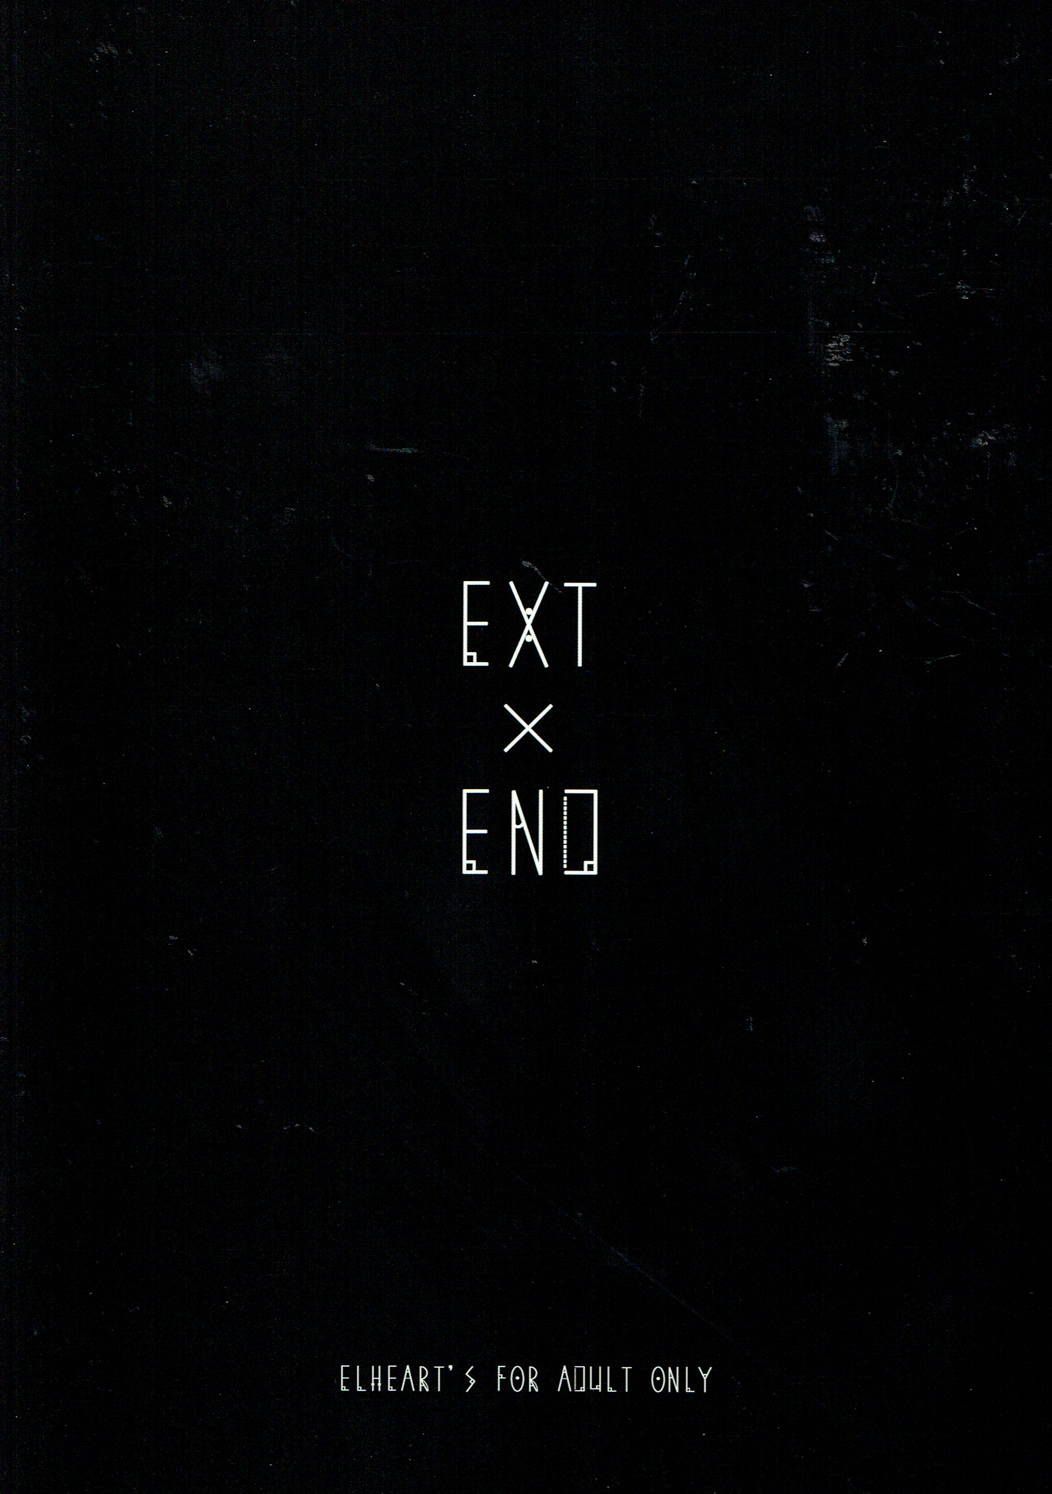 EXT x END